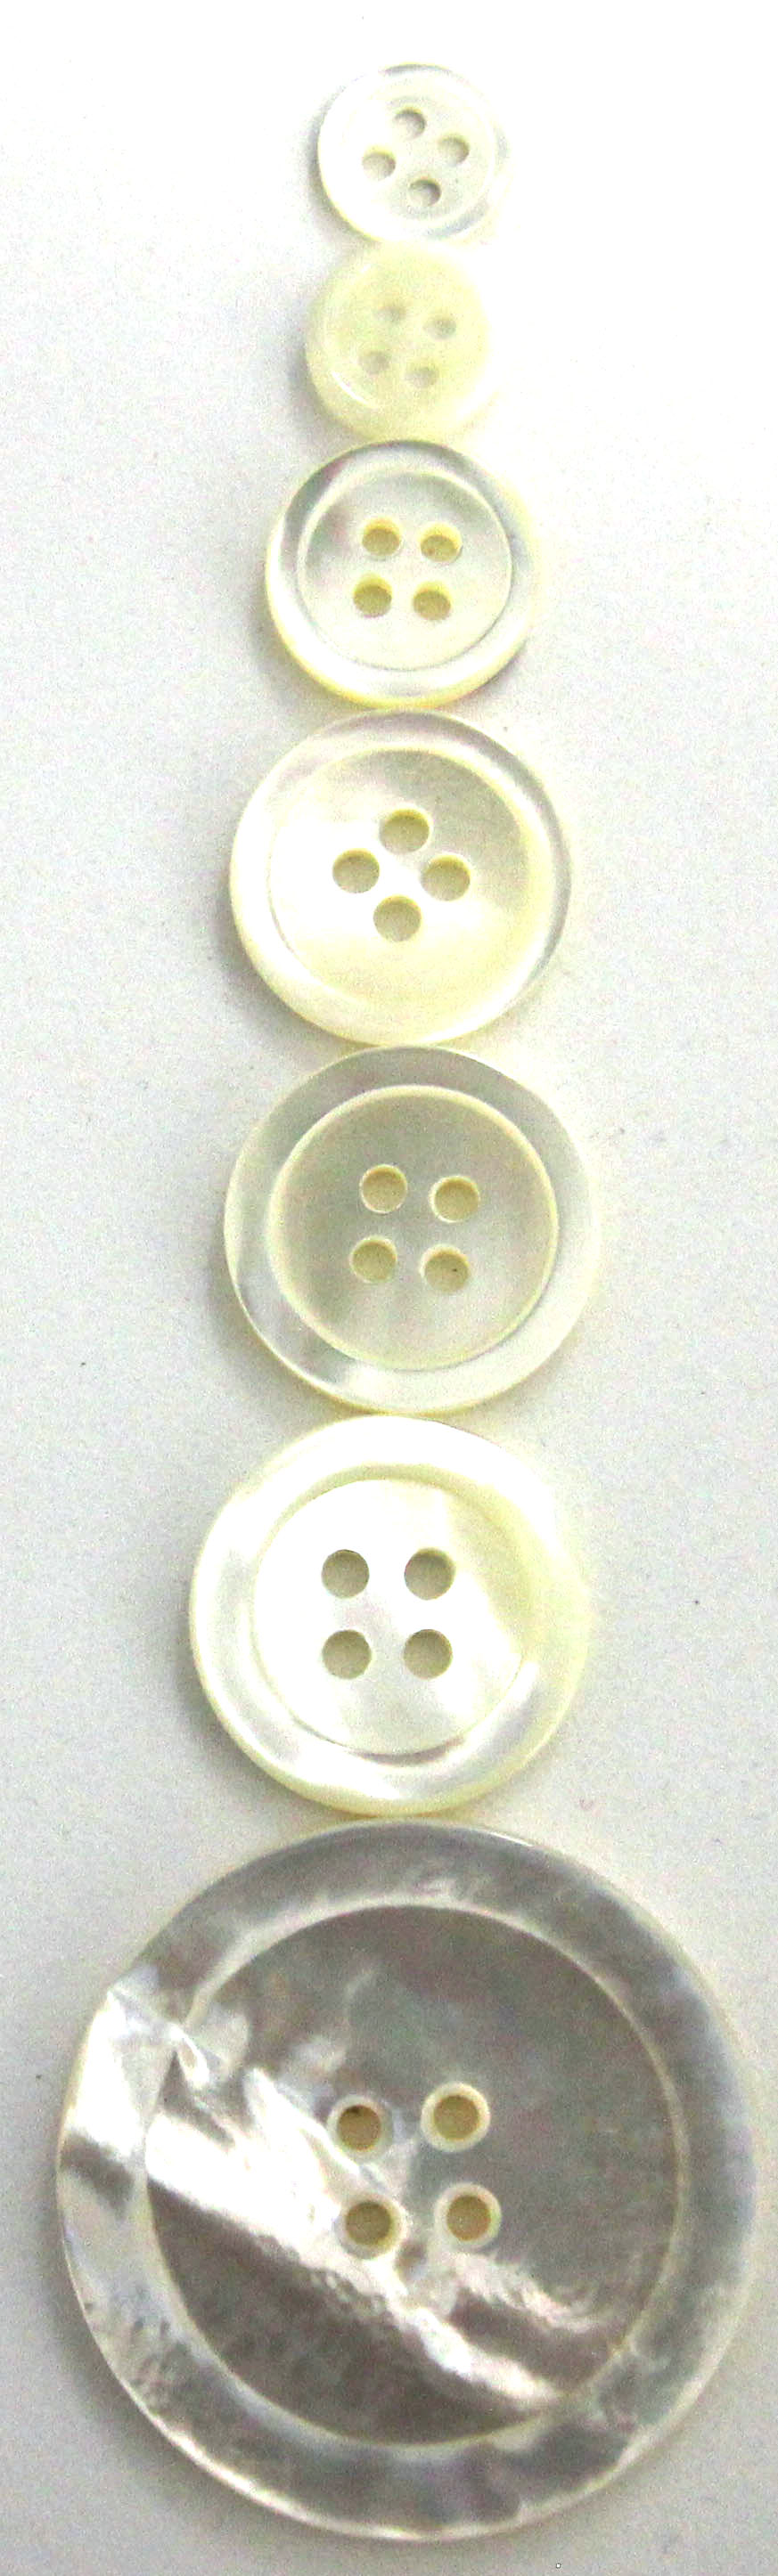 Mother of pearl 4 hole rimmed buttons